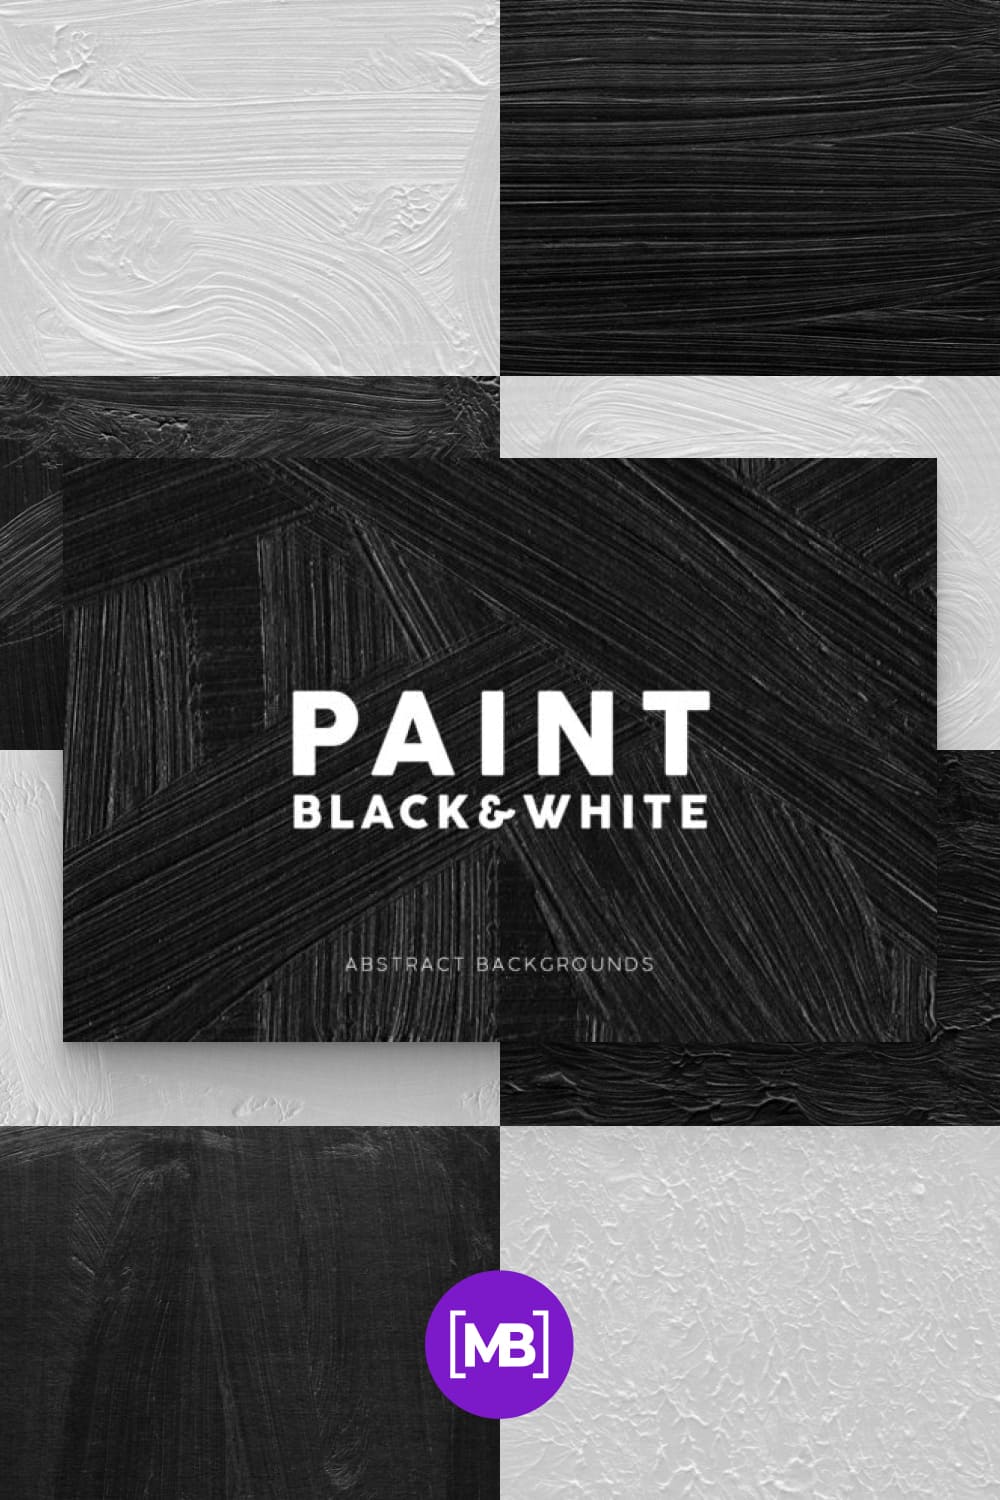 A collection of hand-made black and white paint textures.